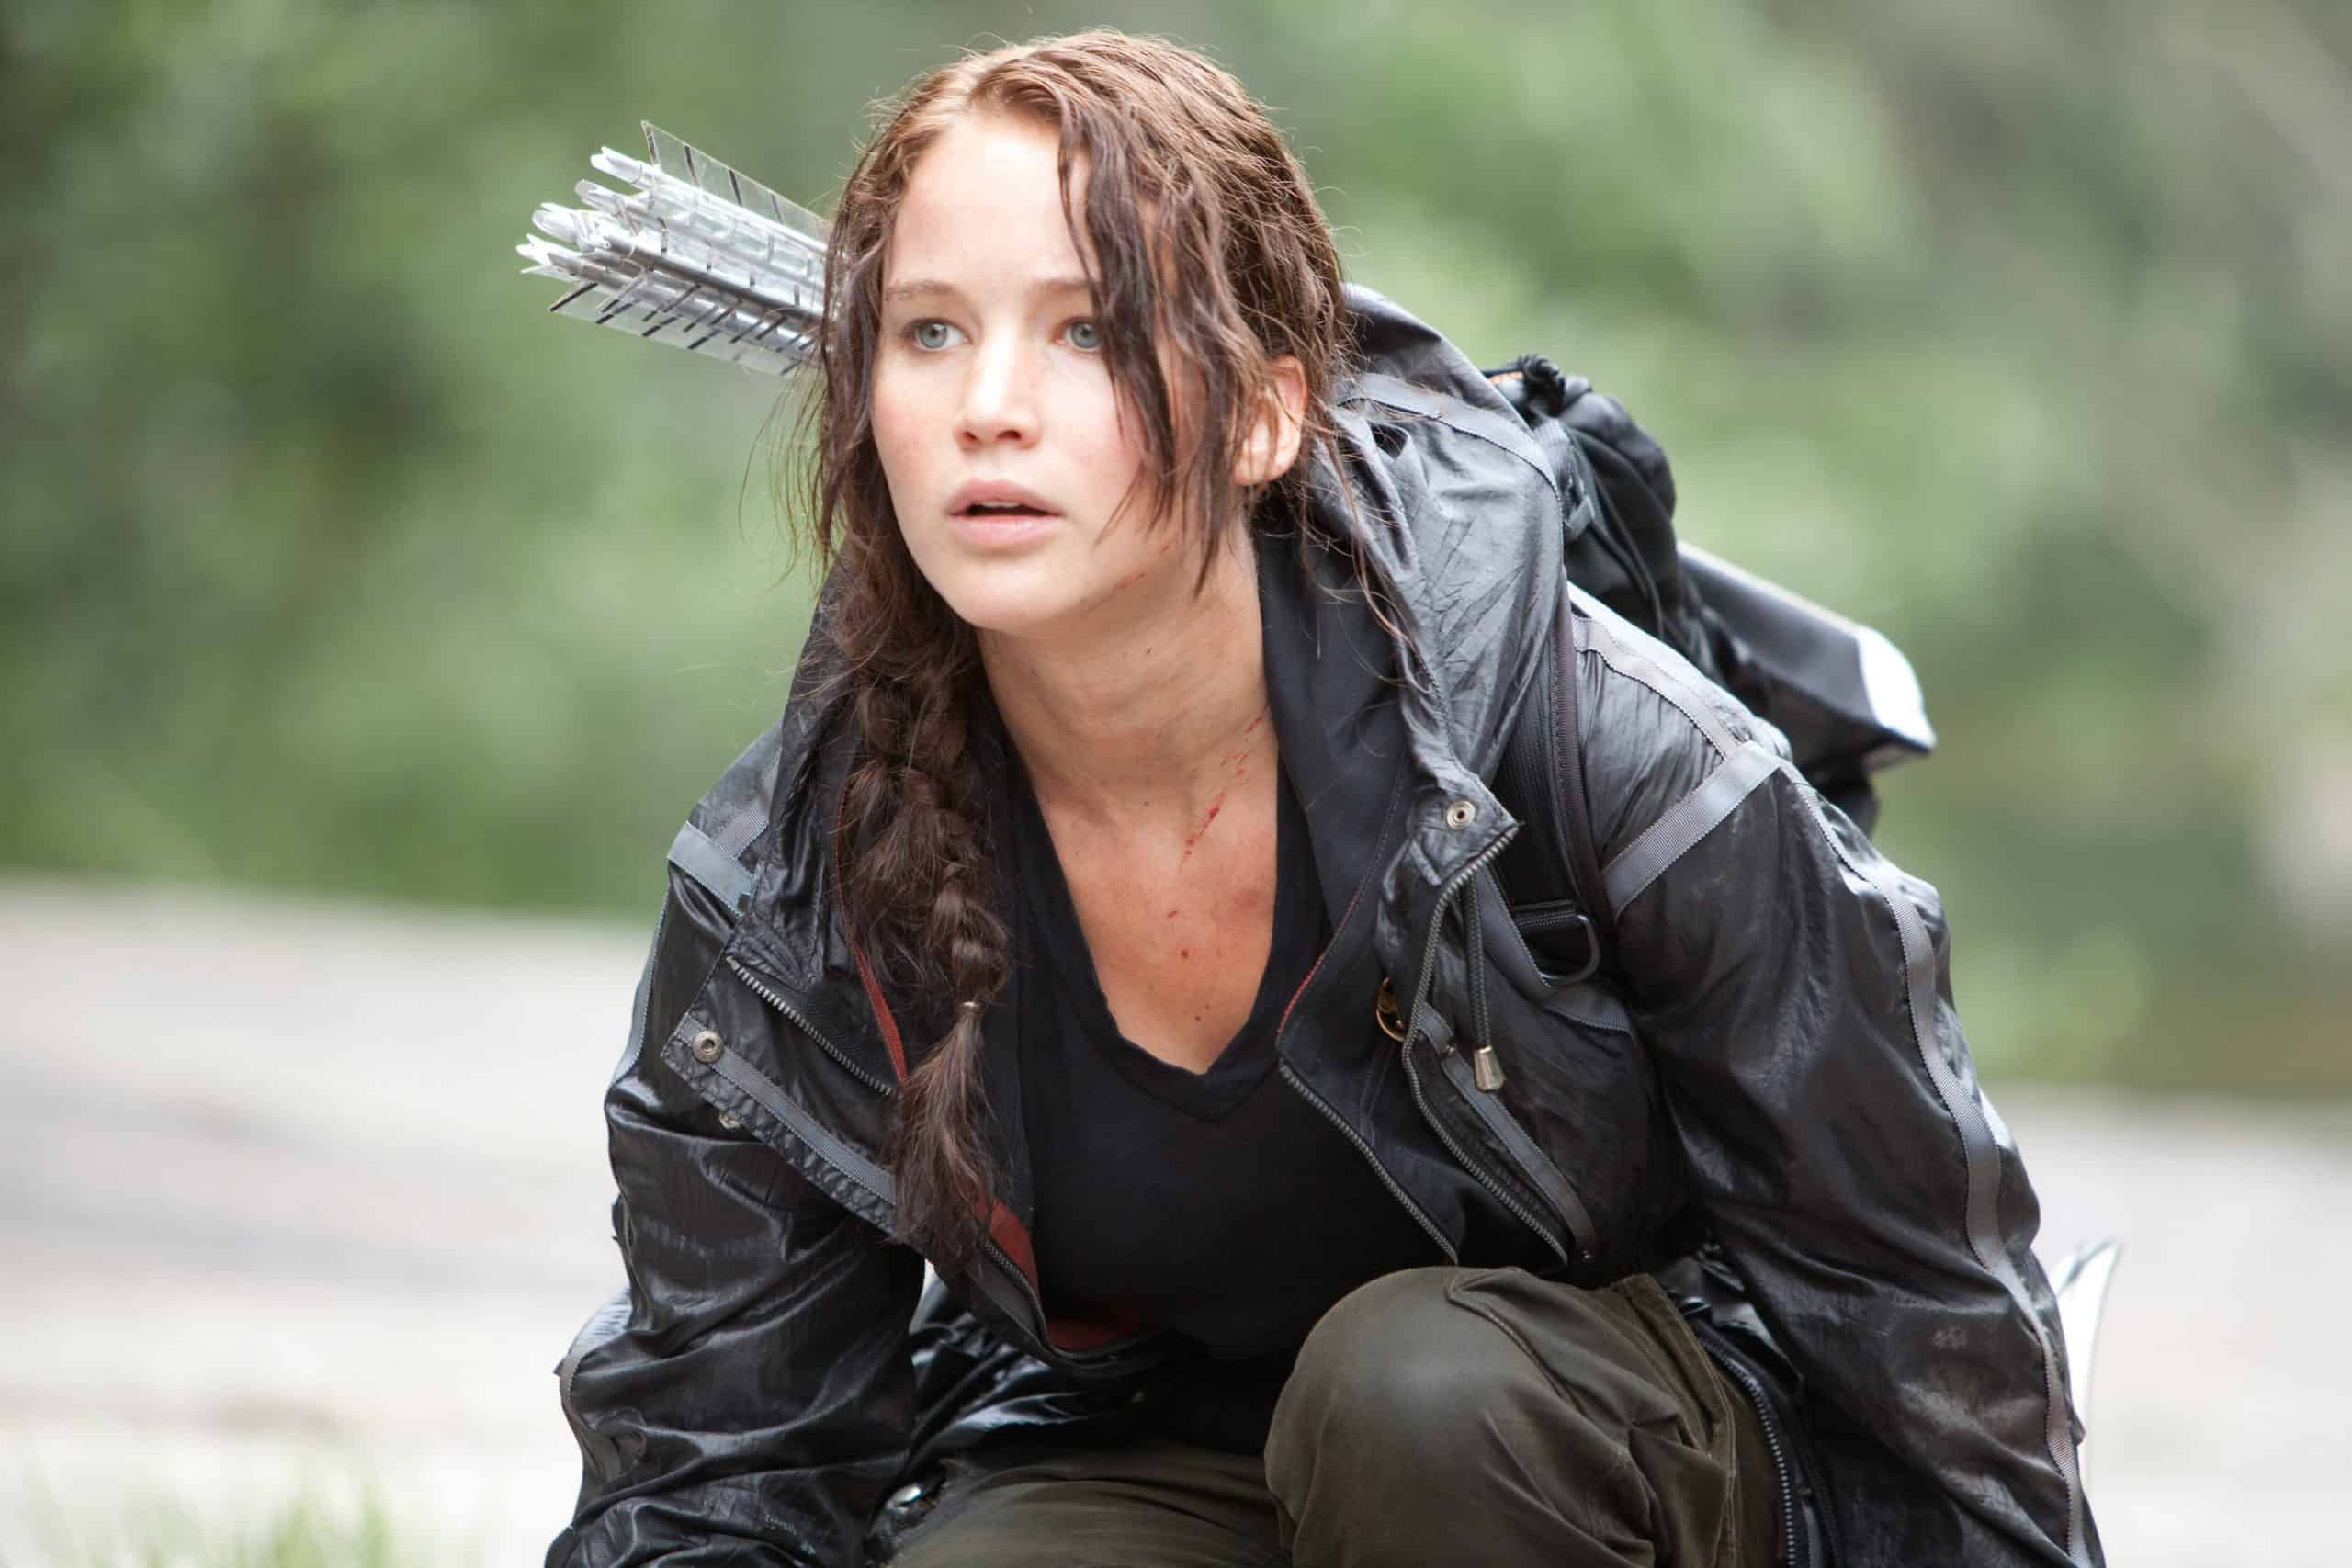 Jennifer Lawrence as Katniss Everdeen in the Hunger Games franchise (Credits: Lionsgate)